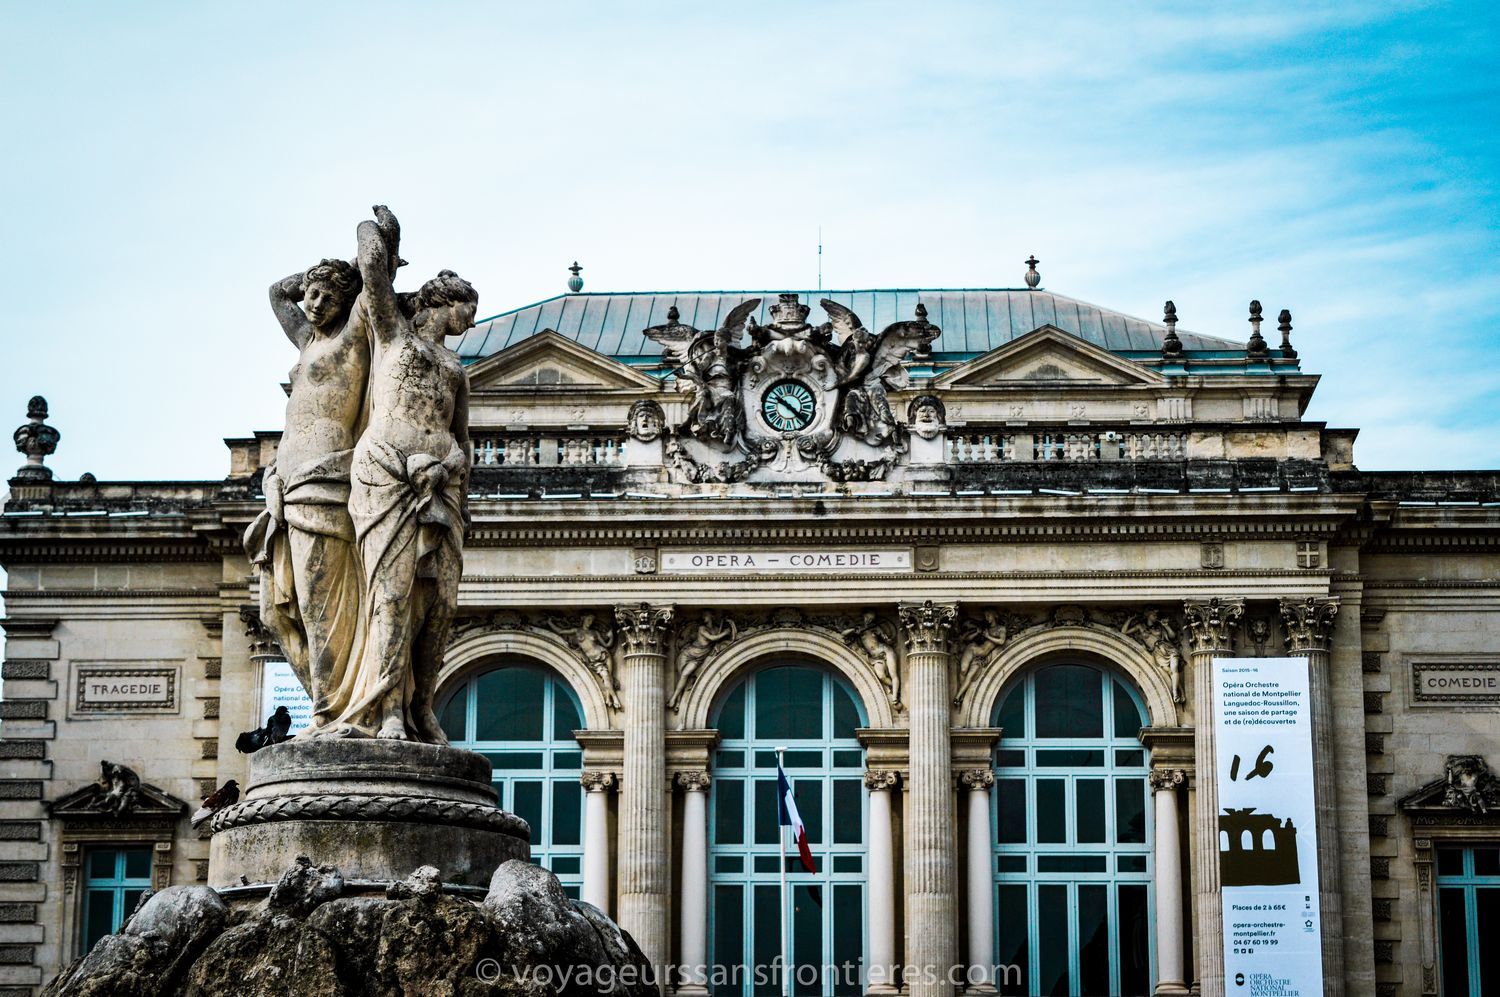 Statue of the 3 Graces and the Opéra Comédie - Montpellier, France